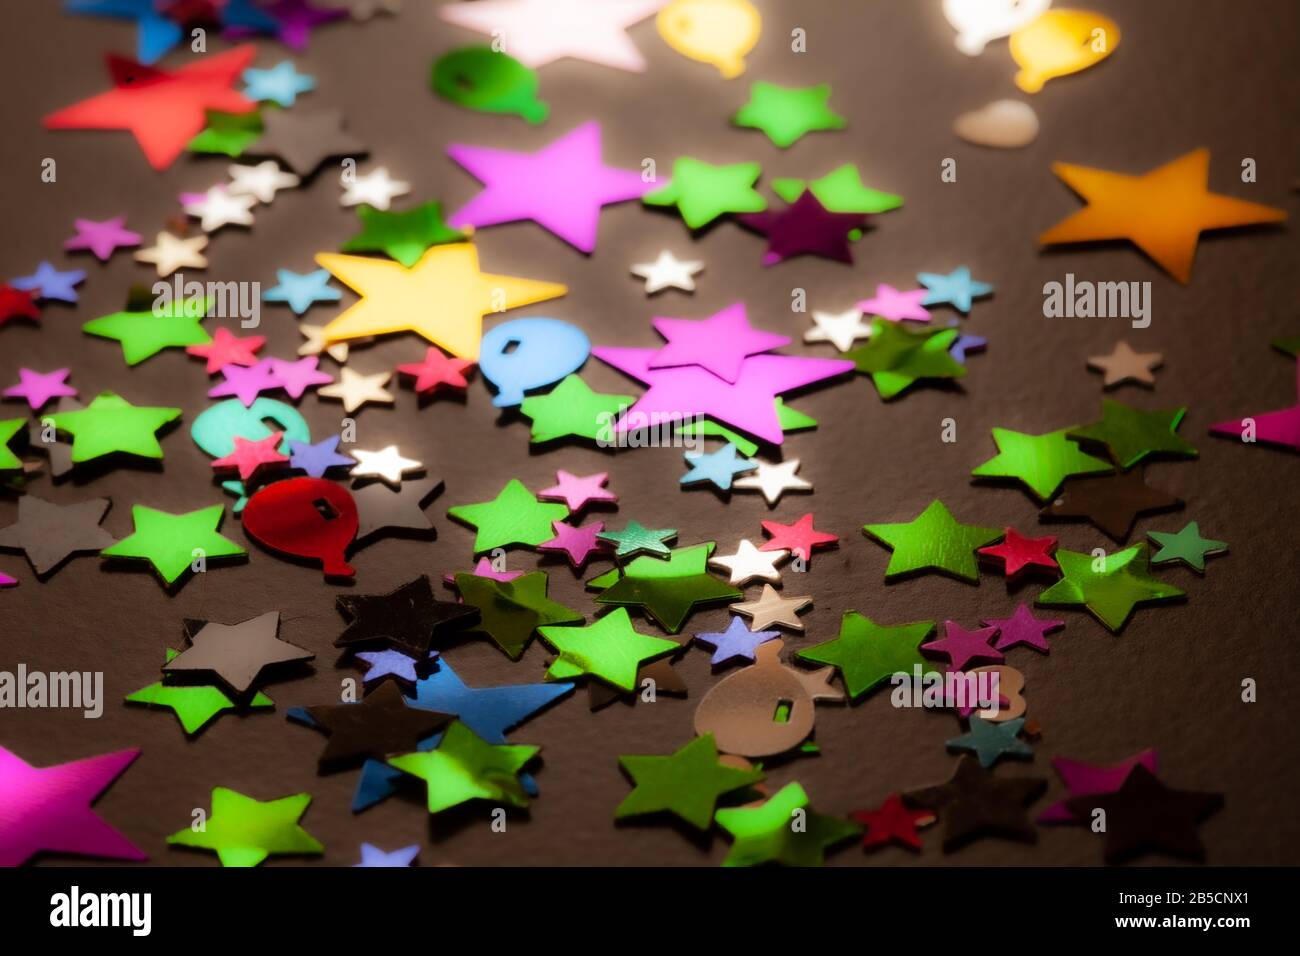 Confetti scattered on a black table background. Stars and other colourful shapes made from multicoloured foil. Stock Photo